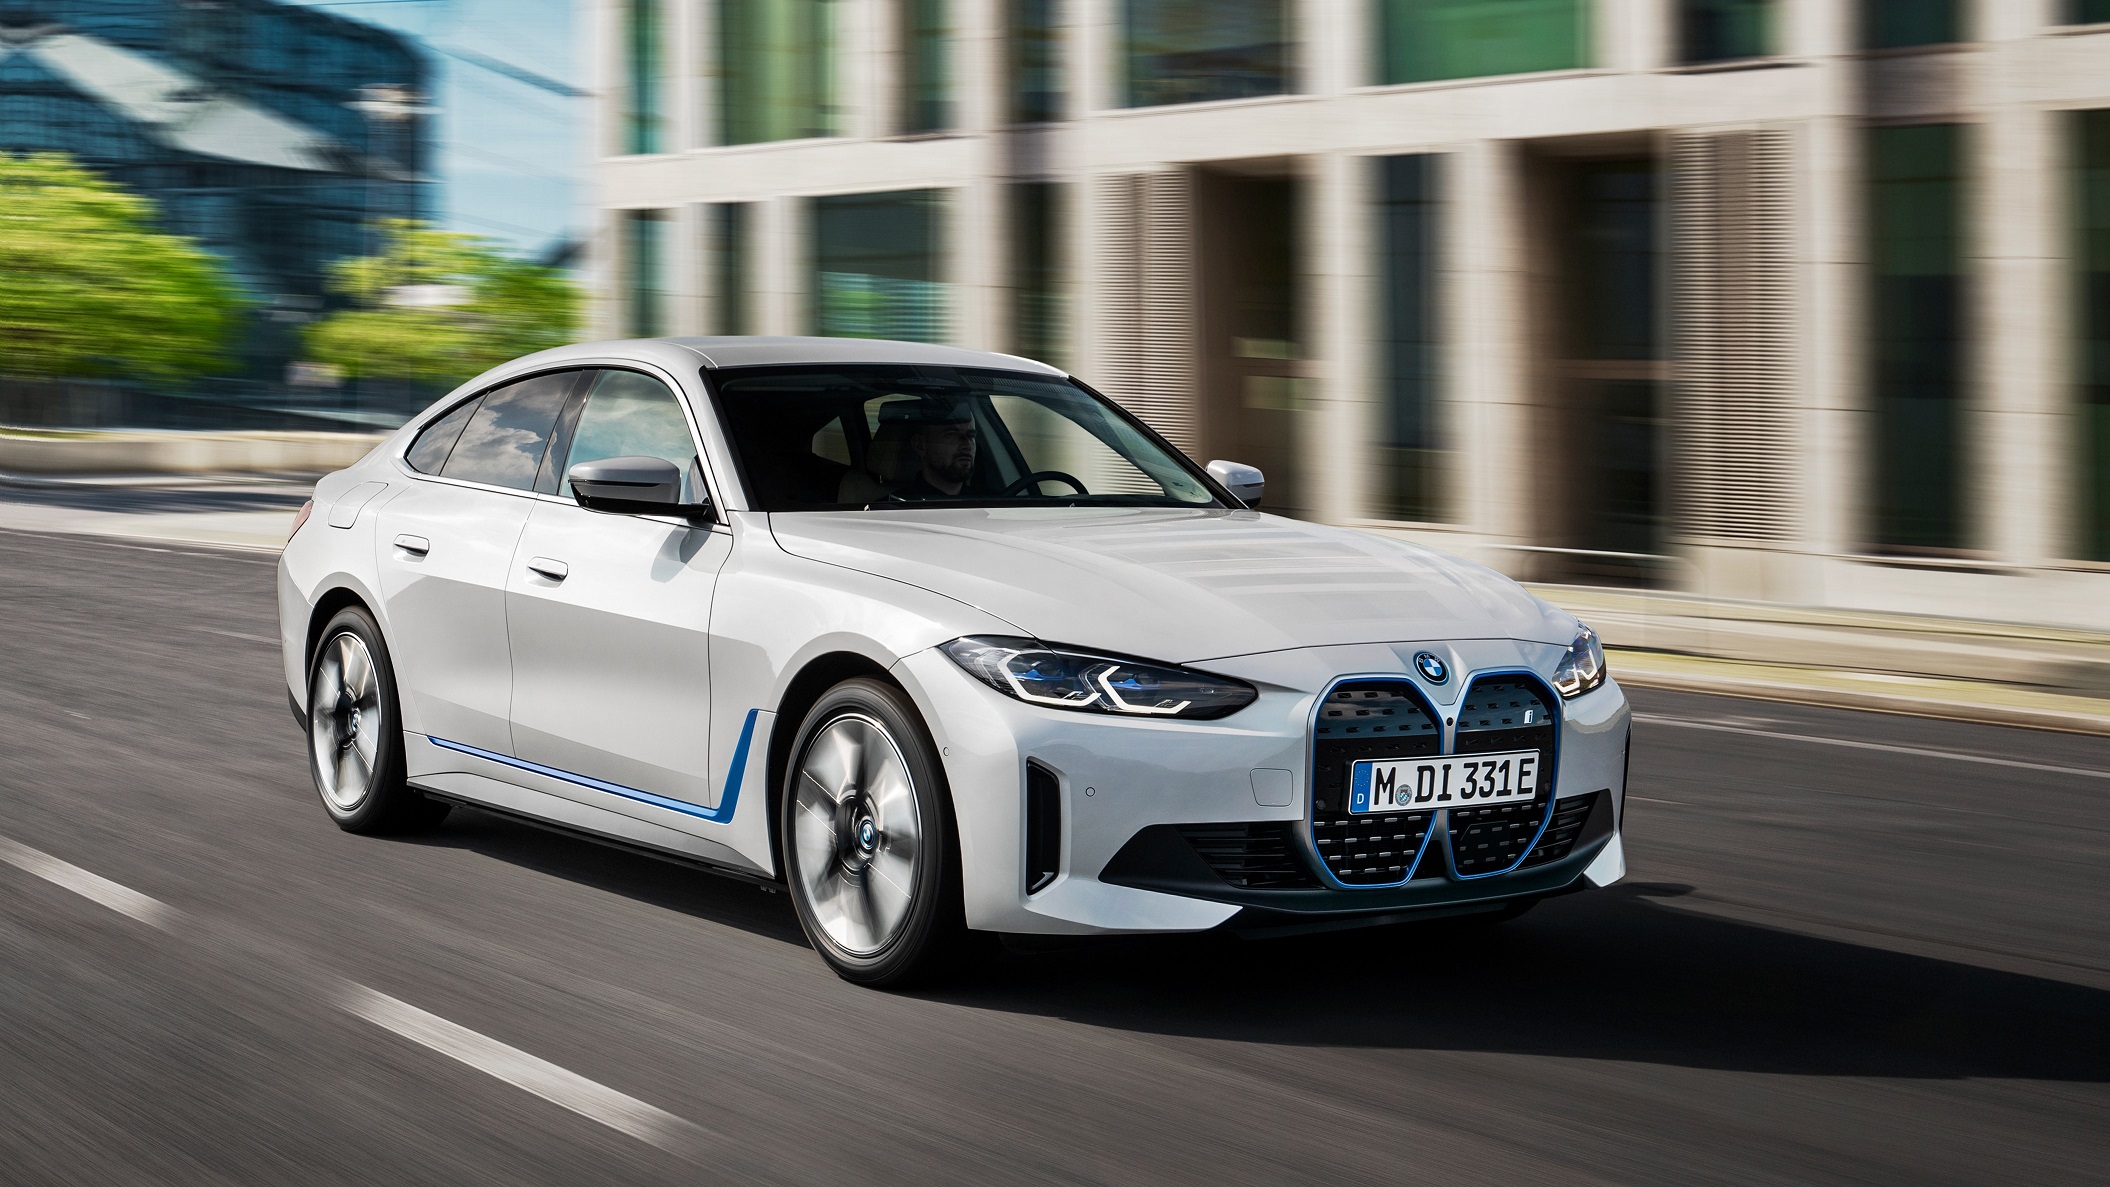 BMW iX3 and i4 confirmed for BMW Malaysia's upcoming EV line-up